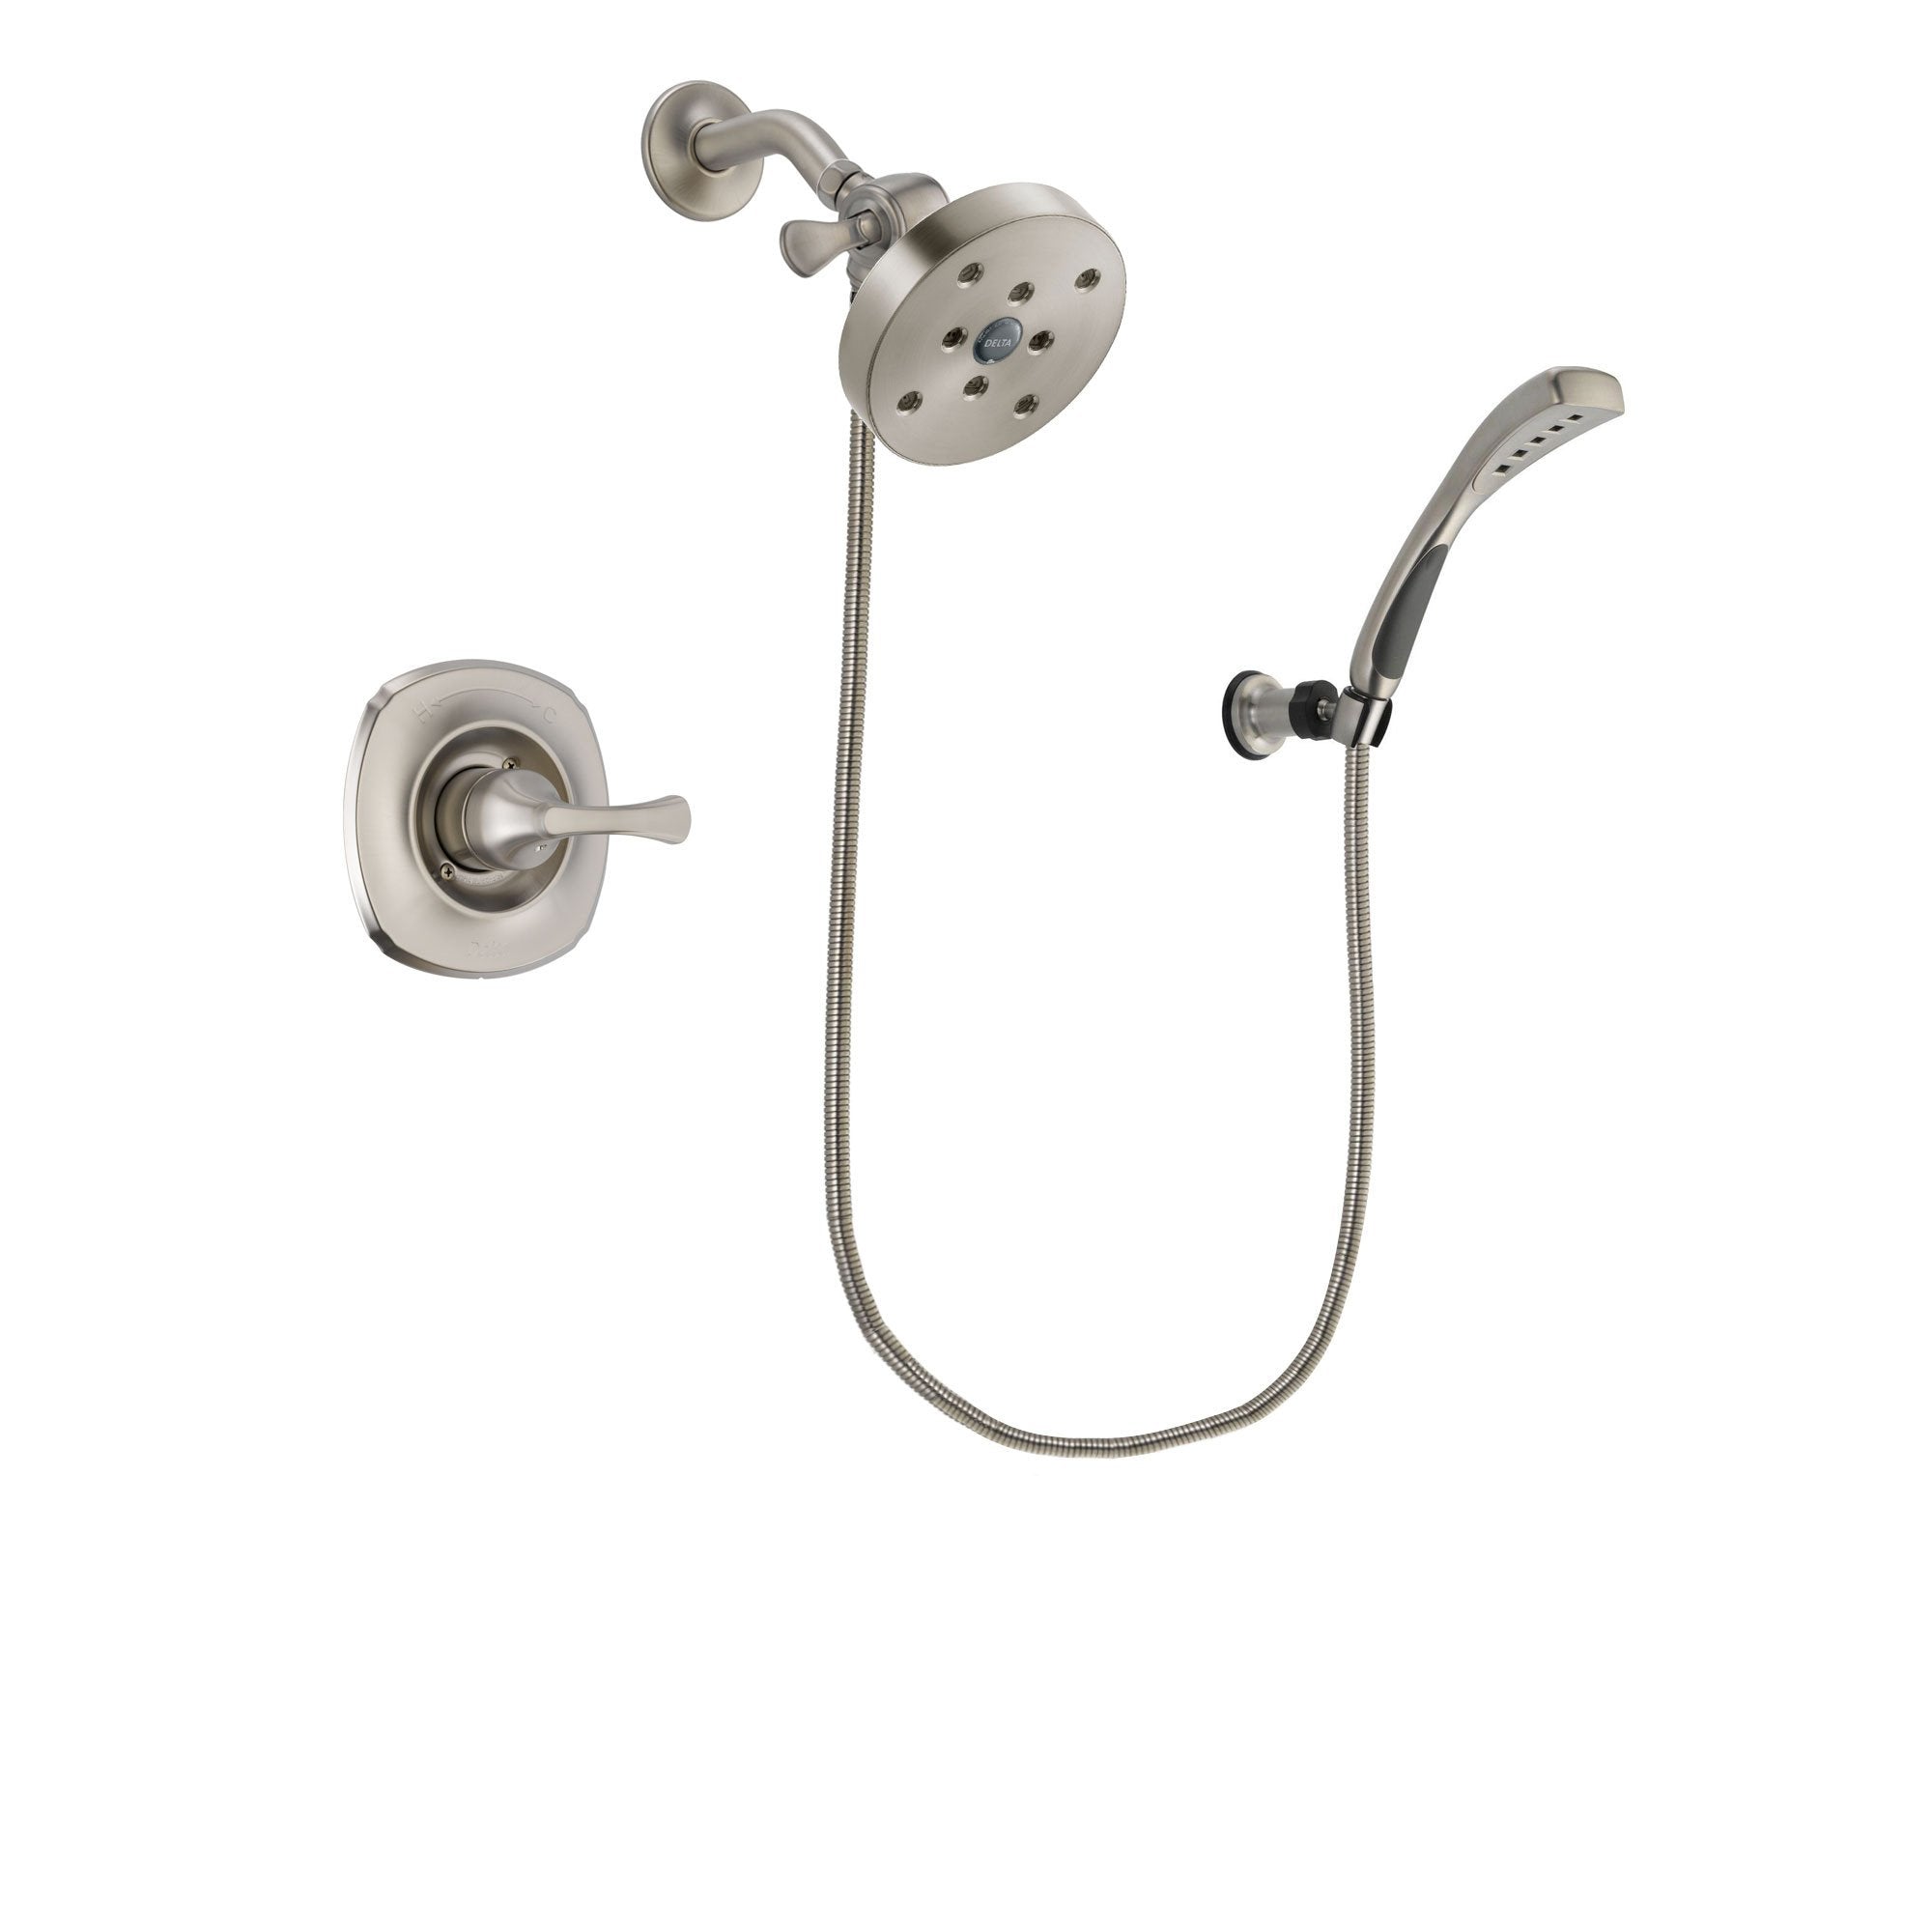 Delta Addison Stainless Steel Finish Shower Faucet System Package with 5-1/2 inch Shower Head and Wall Mounted Handshower Includes Rough-in Valve DSP1904V